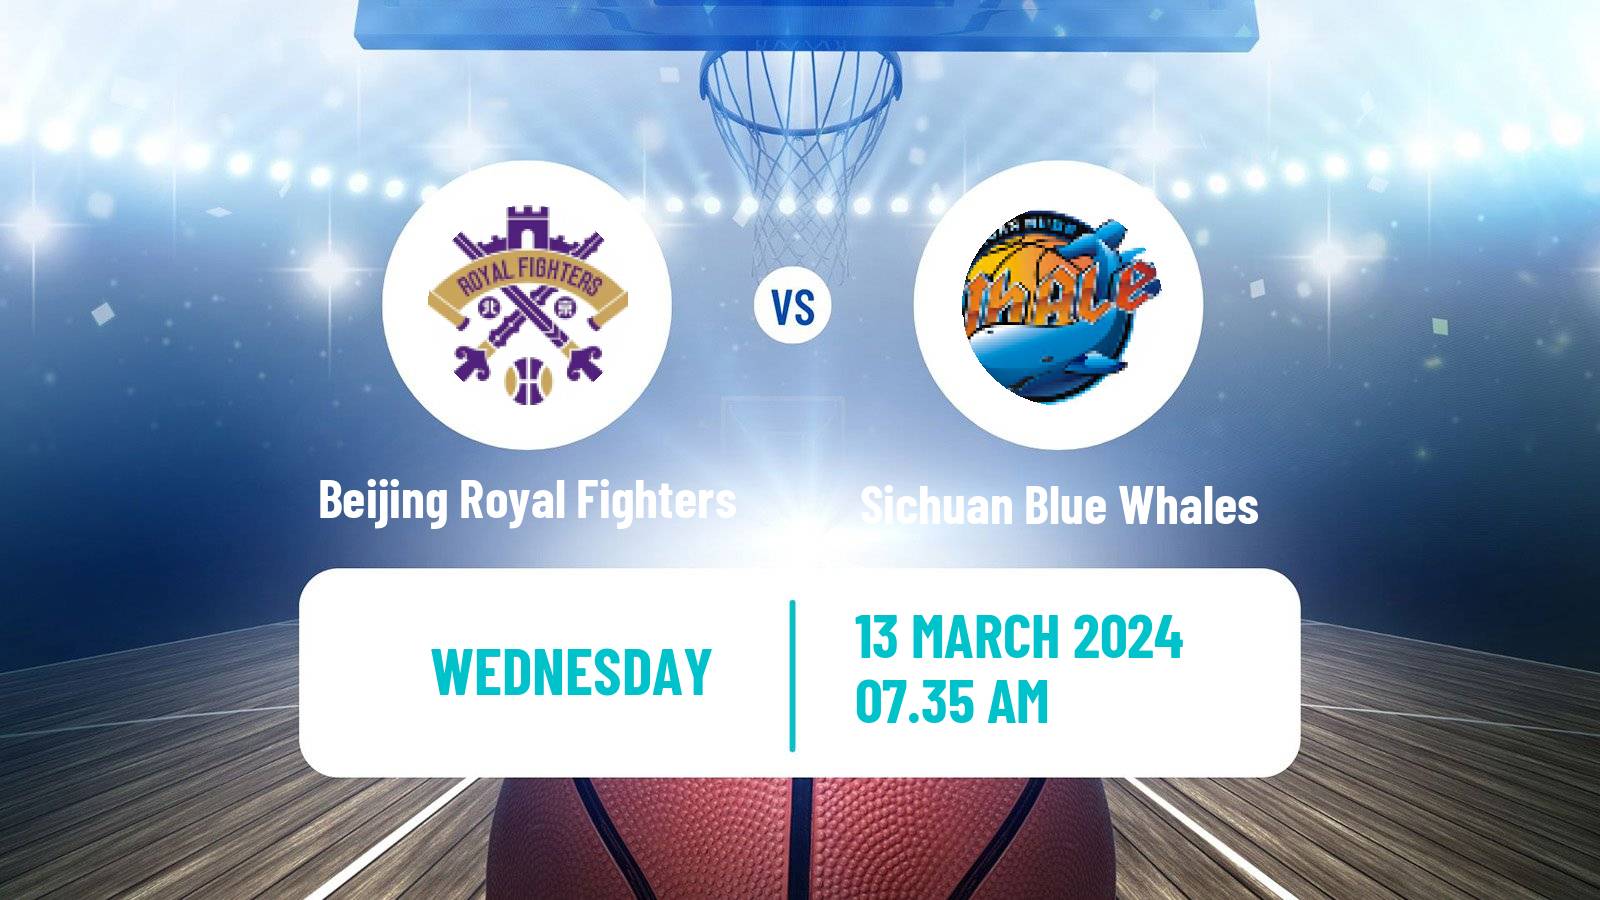 Basketball CBA Beijing Royal Fighters - Sichuan Blue Whales